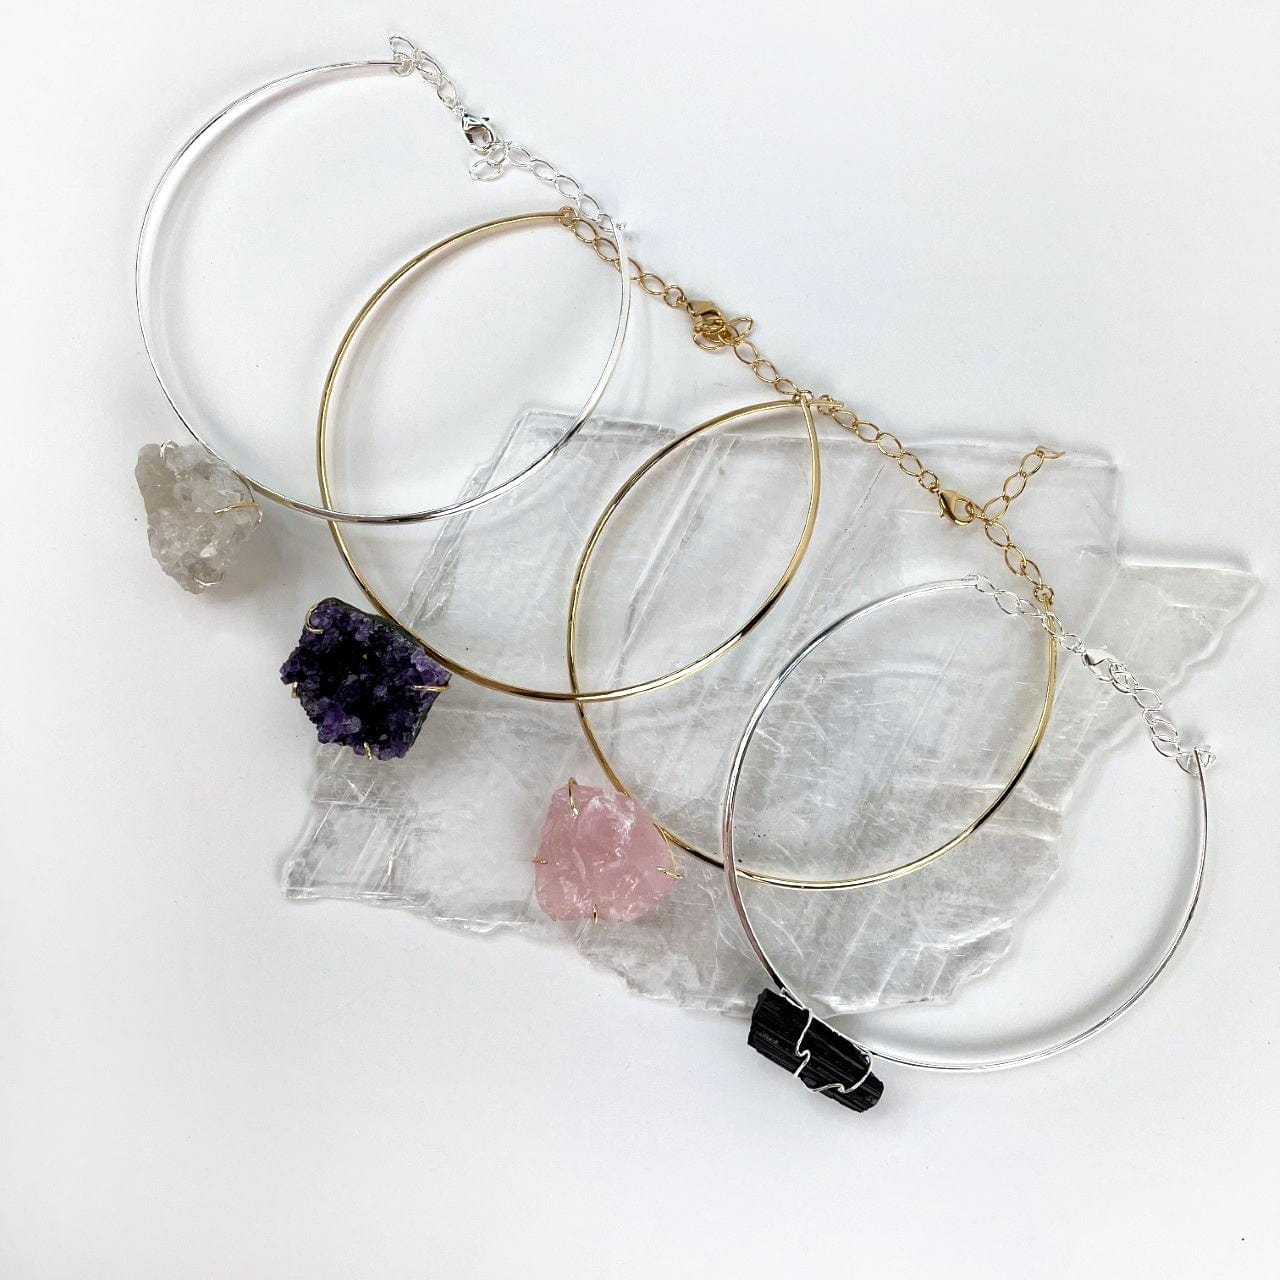 Crystal Gemstone Necklace in Gold or Silver Electroplated, shown here in crystal cluster, amethyst cluster, rose quartz and tourmaline